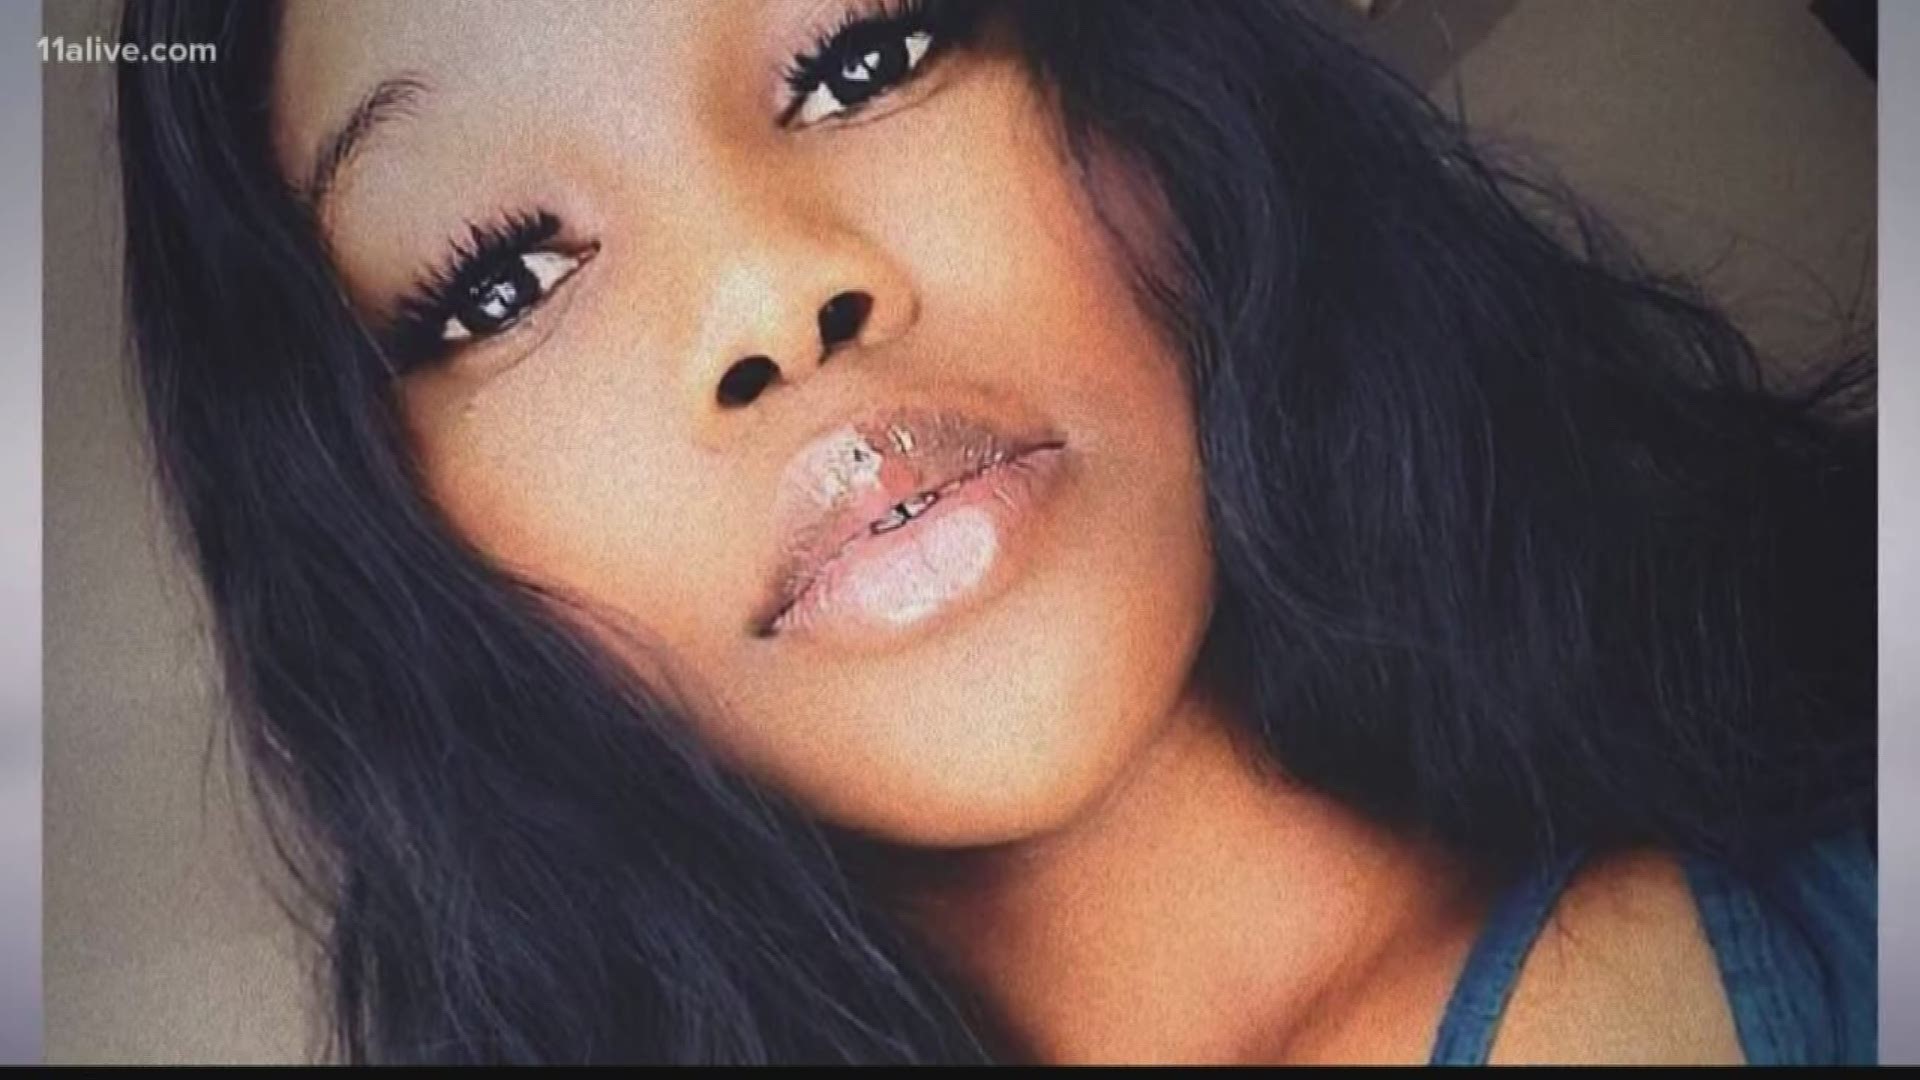 Following Friday night's emotional viewing service, Saturday, family, friends and even strangers will be gathering to say goodbye to college student Alexis Crawford.